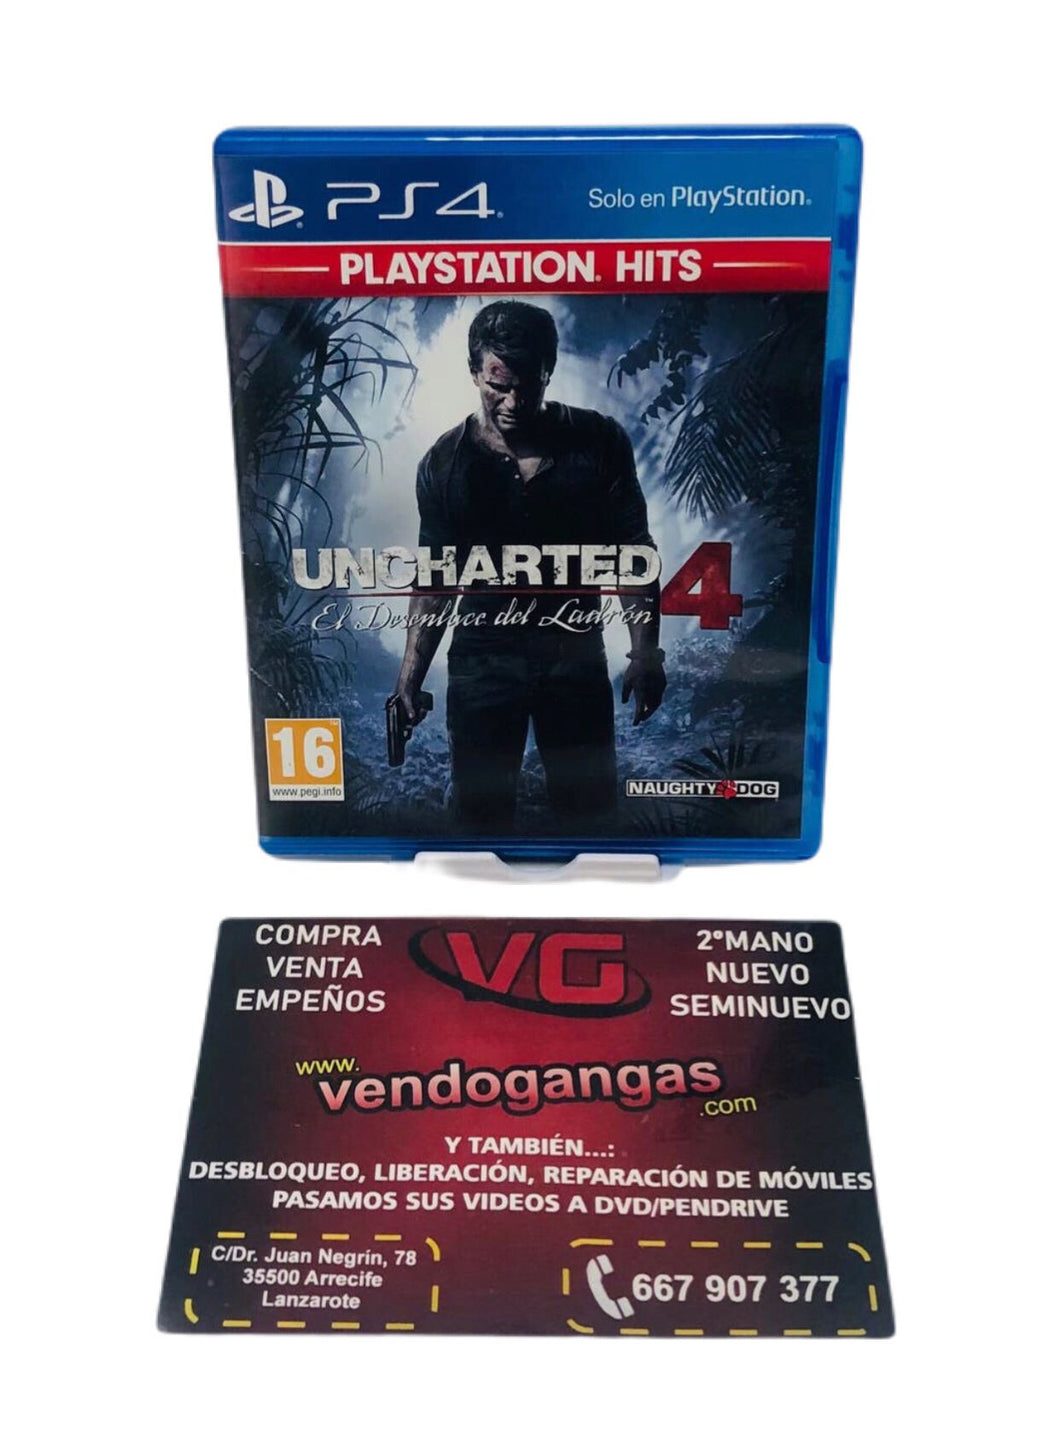 UNCHARTED 4 SONY PS4